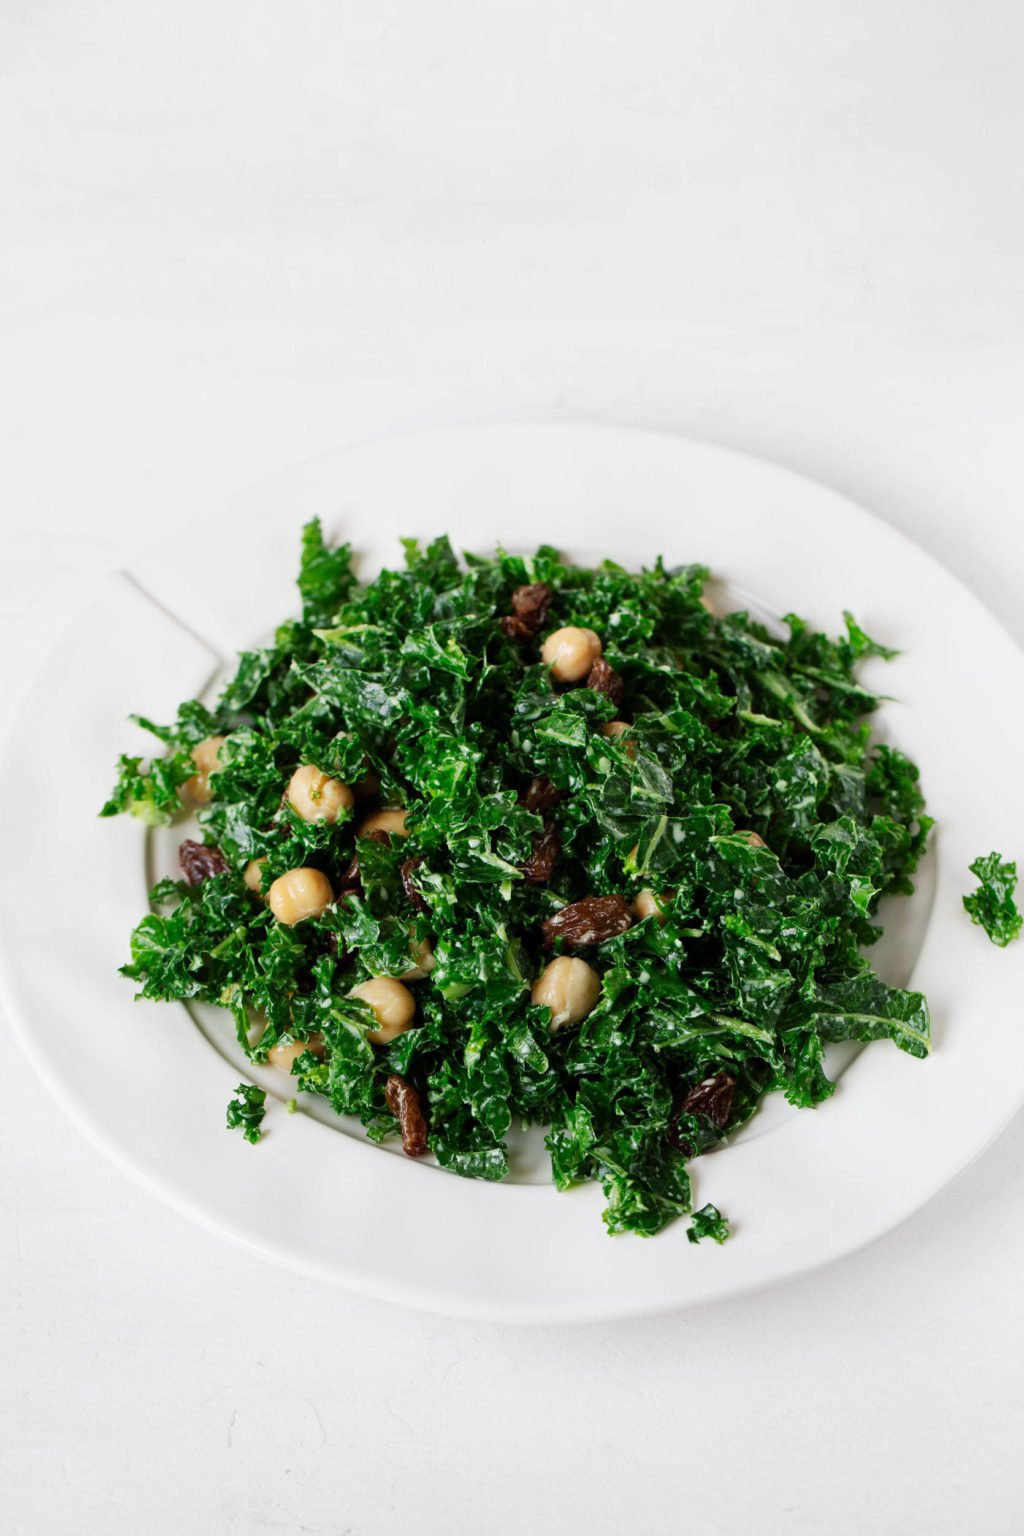 A white serving plate, piled high with greens, raisins, and legumes, rests on a white surface.